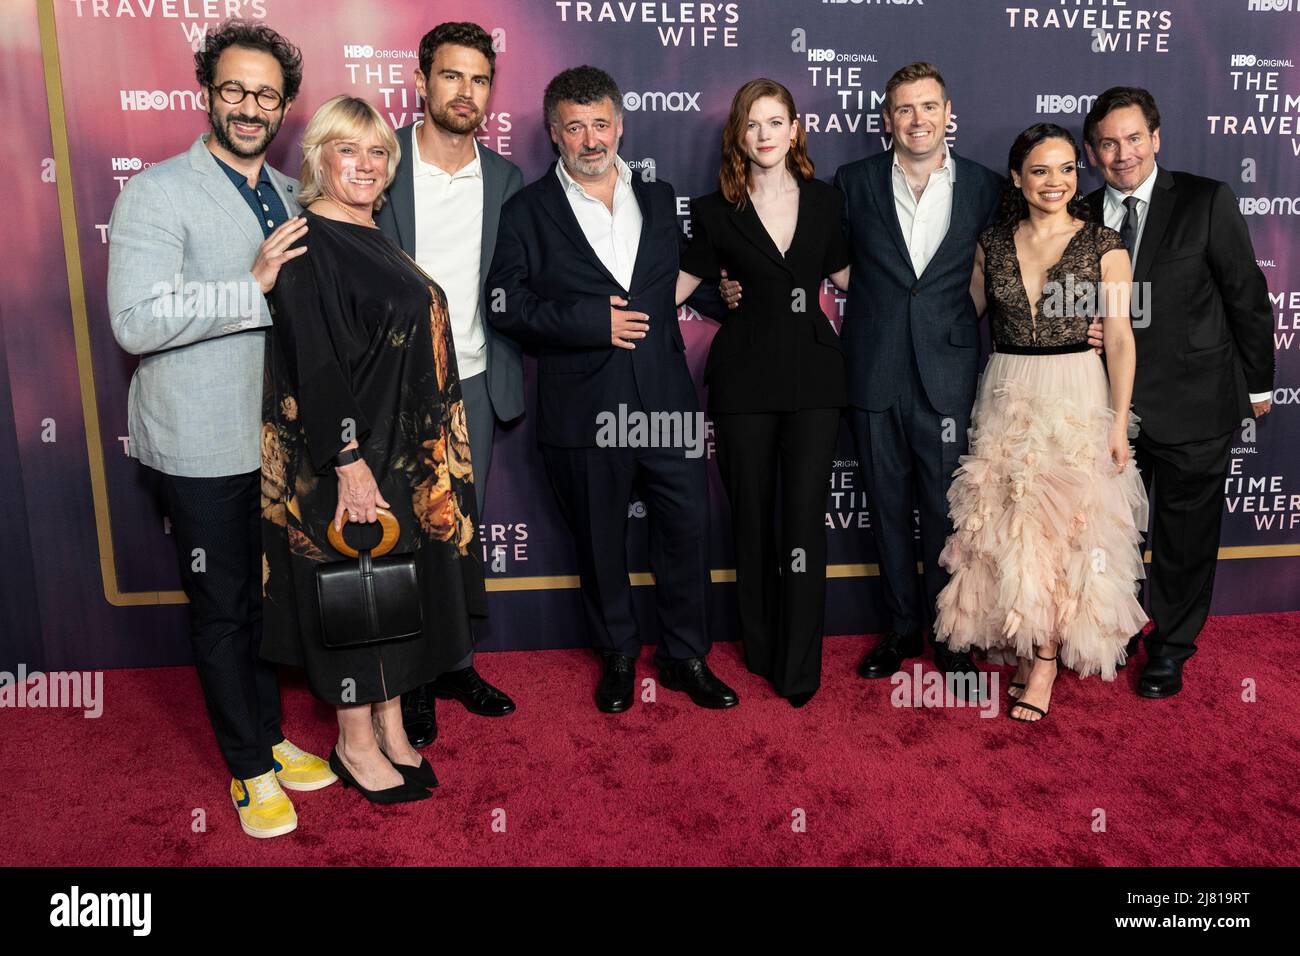 New York, NY - May 11, 2022: Desmin Borges, Sue Vertue, Theo James, Steven Moffat, Rose Leslie, Brian Minchin, Natasha Lopez, David Nutter attend HBO's The Time Traveler's Wife premiere at Morgan Library Stock Photo